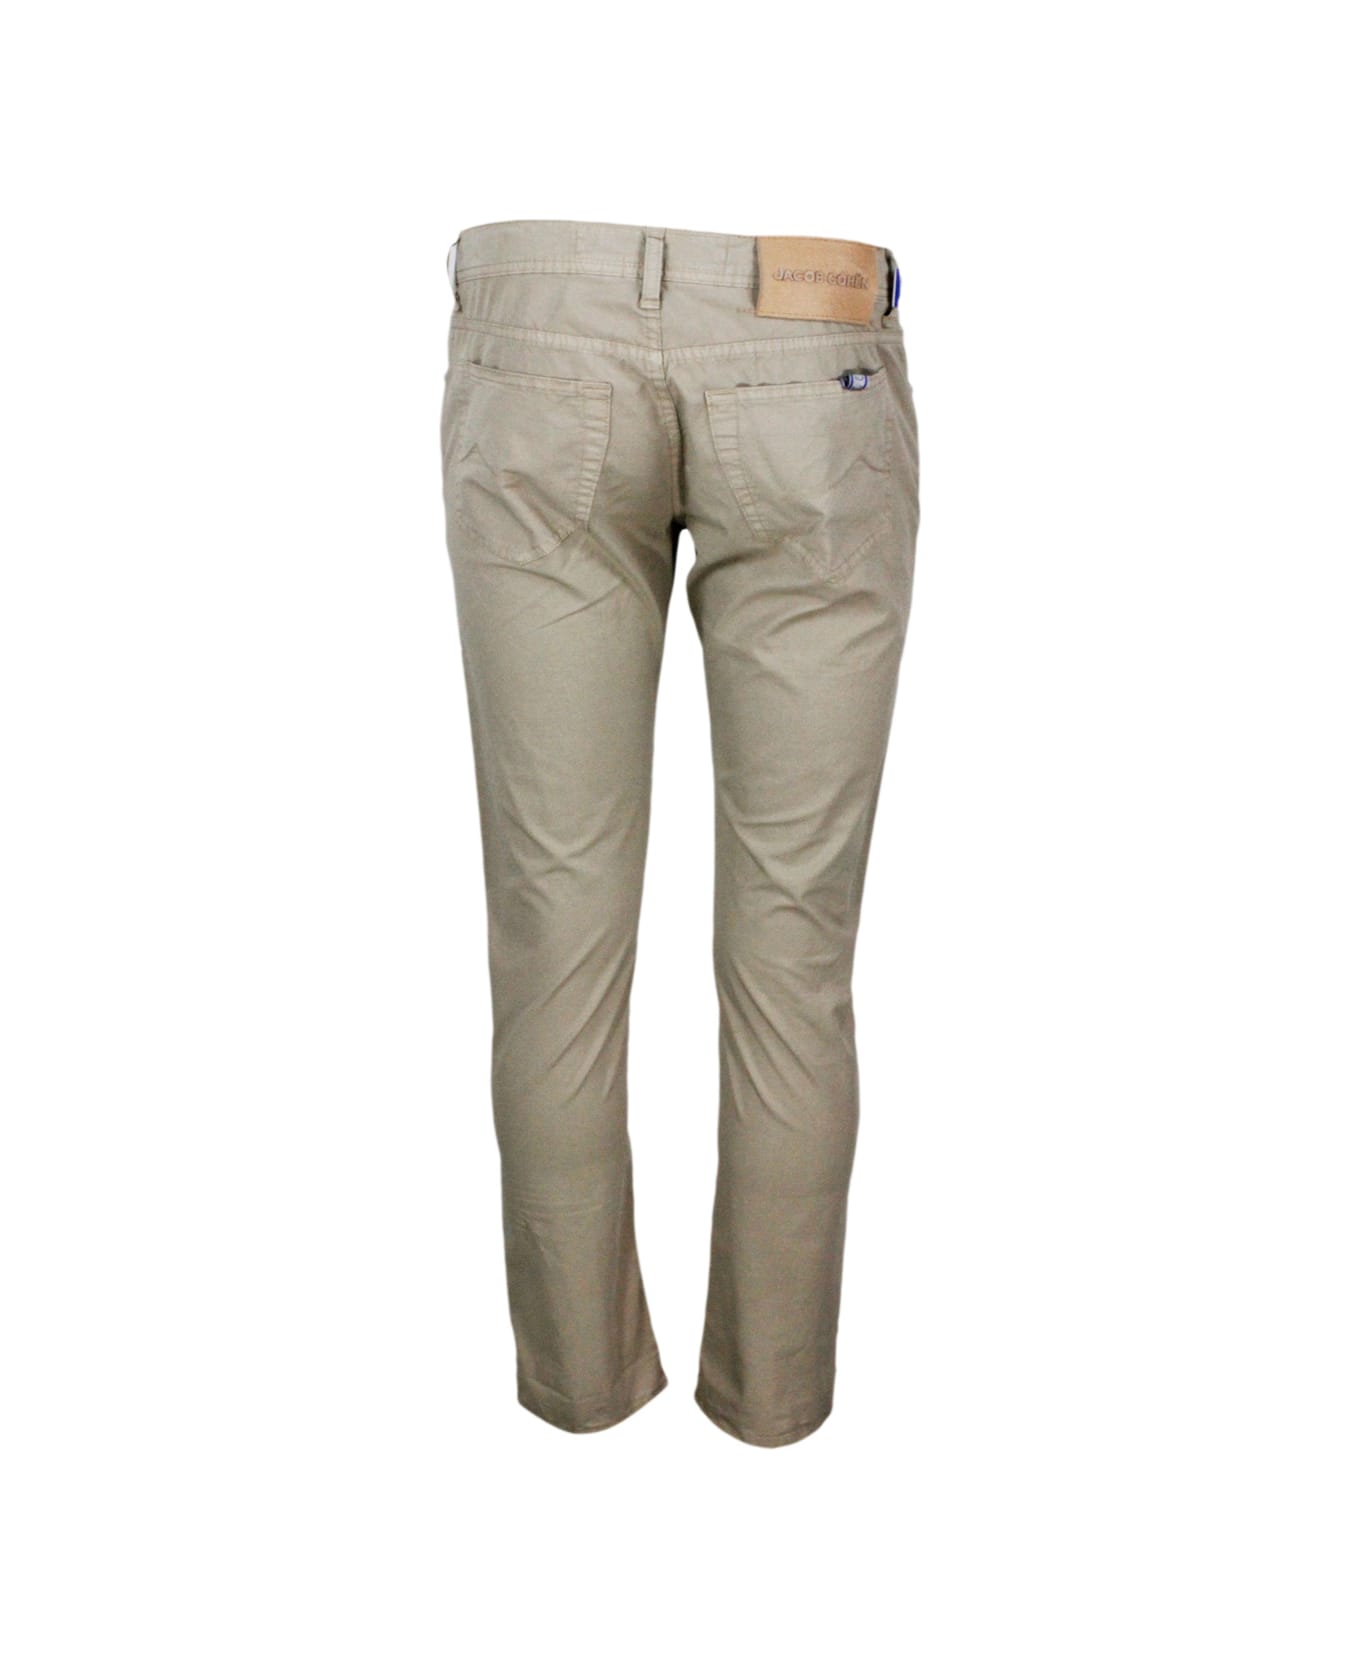 Jacob Cohen Bard J688 Luxury Edition Trousers In Soft Stretch Cotton With 5 Pockets With Closure Buttons And Lacquered Button And Pony Skin Tag With Logo - Beige ボトムス